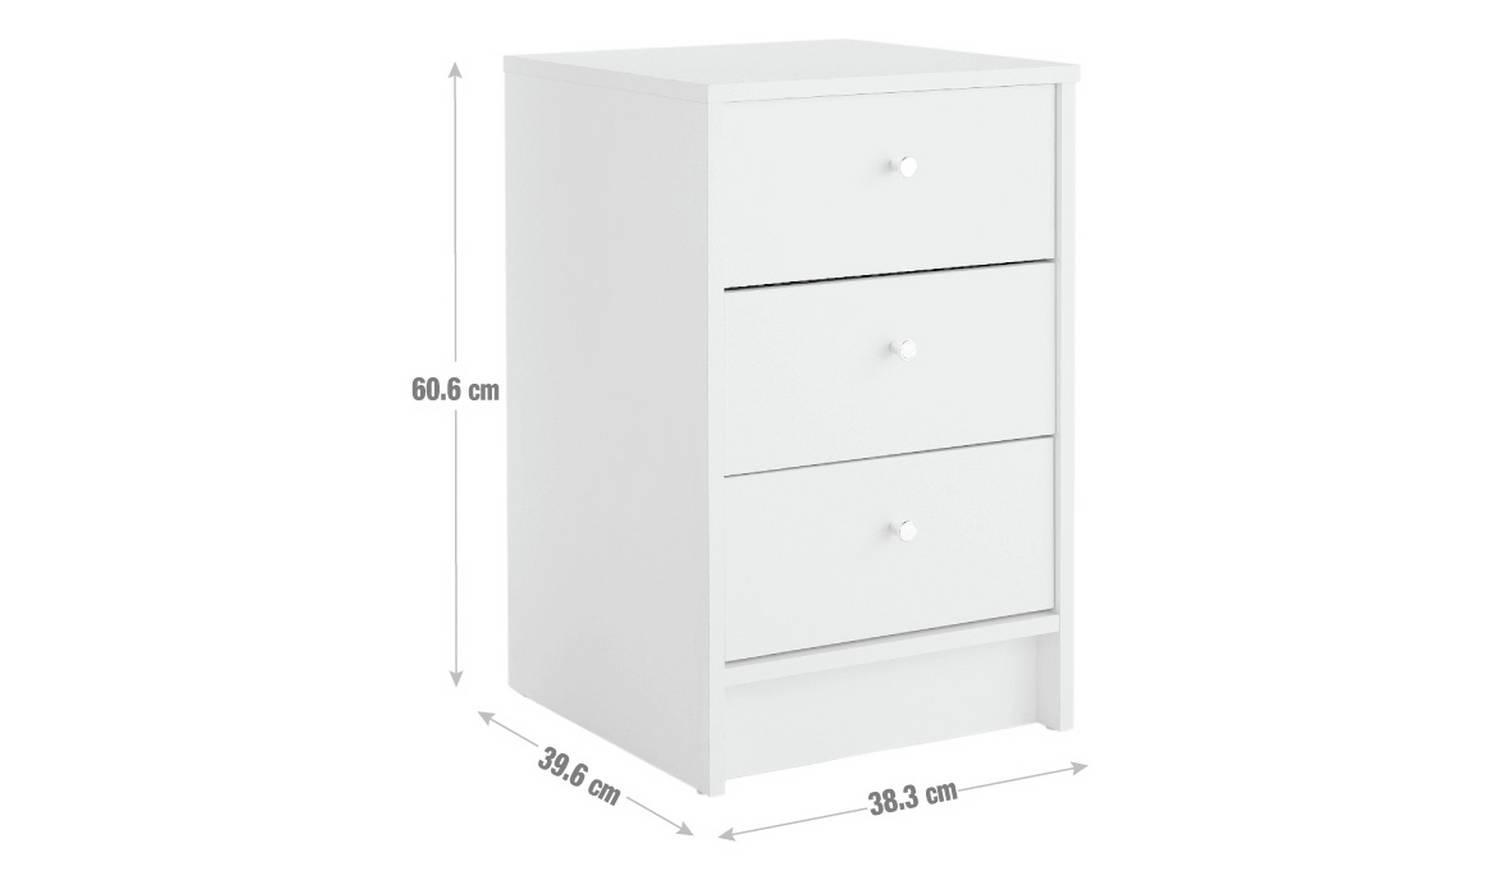 Child S Chest Of Drawers Argos In Le12 Charnwood For 10 00 For